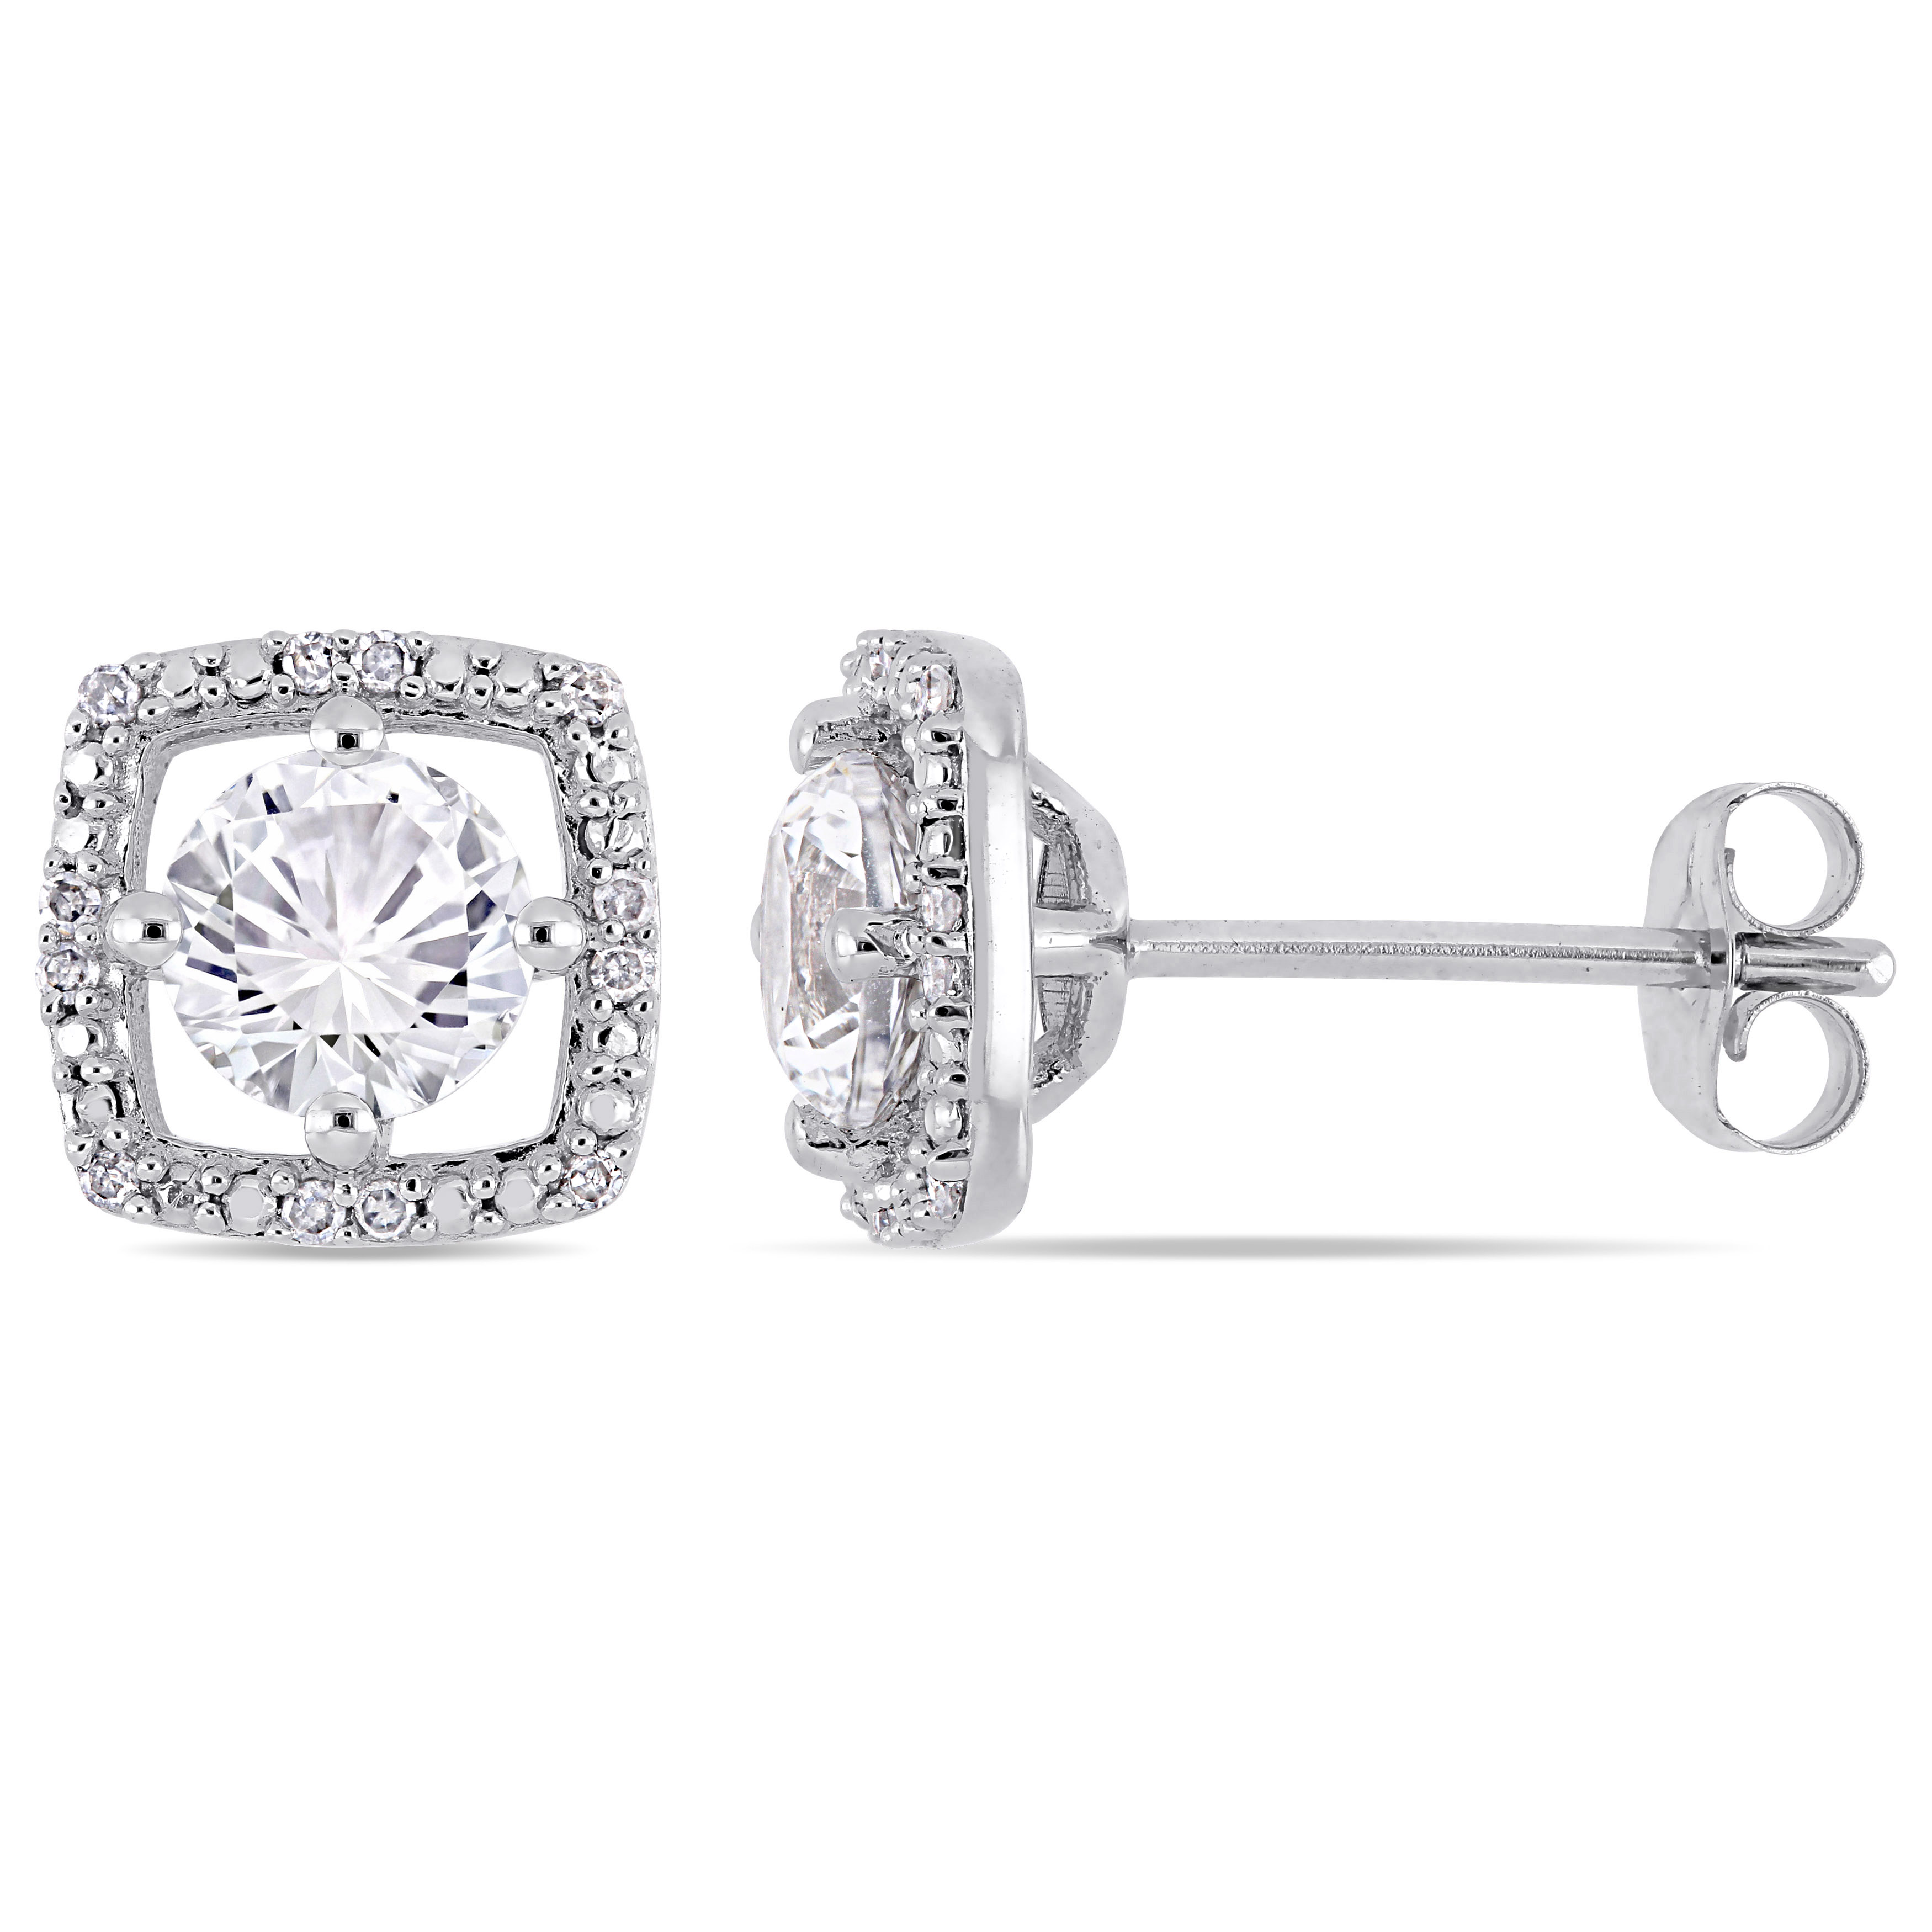 1 1/3 CT TGW Created White Sapphire and Diamond Stud Earrings in 10k White Gold